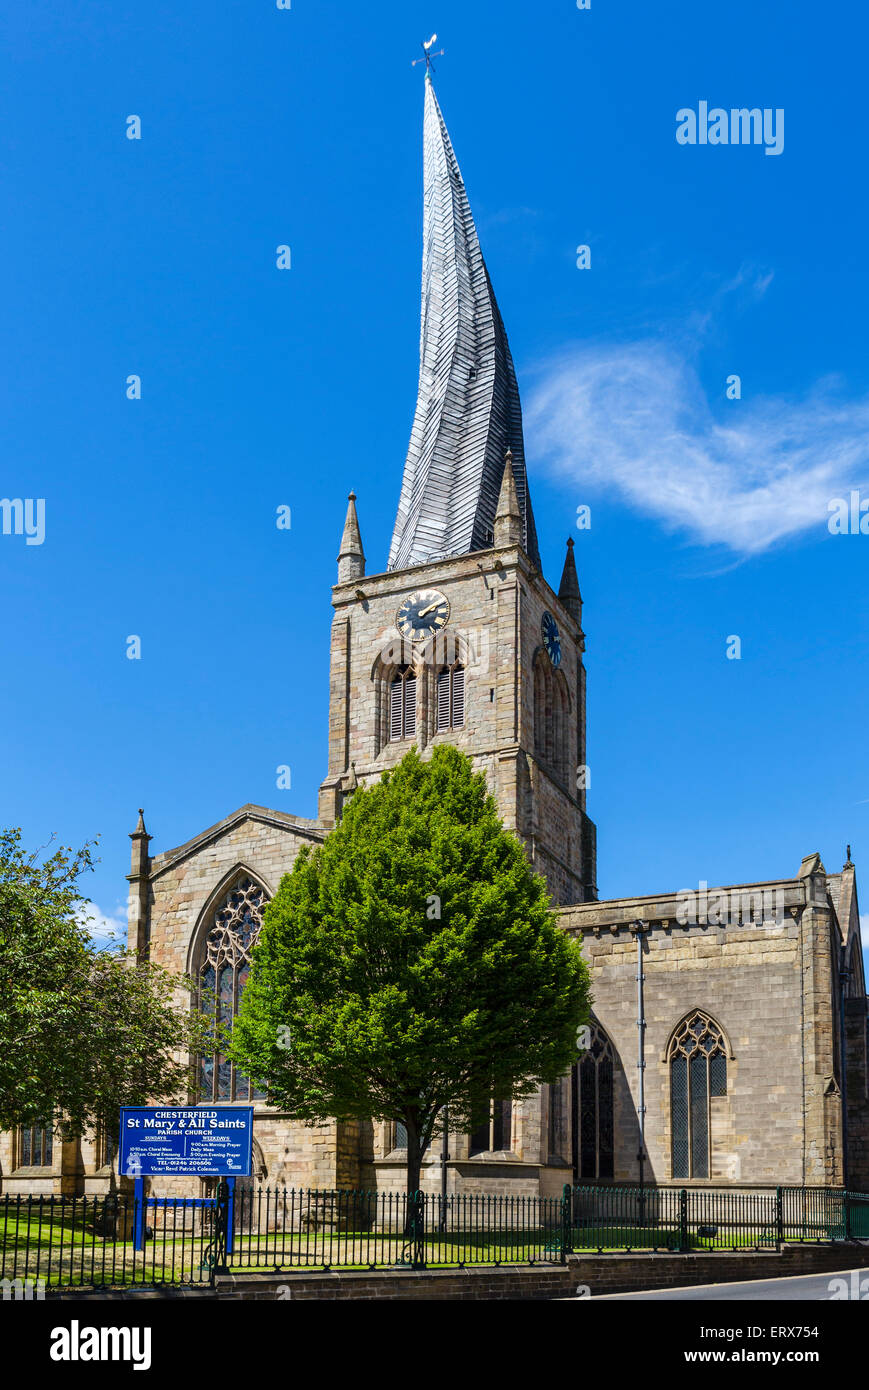 The Church of St Mary and All Saints with its famous Crooked Spire, Chesterfield, Derbyshire, England, UK Stock Photo